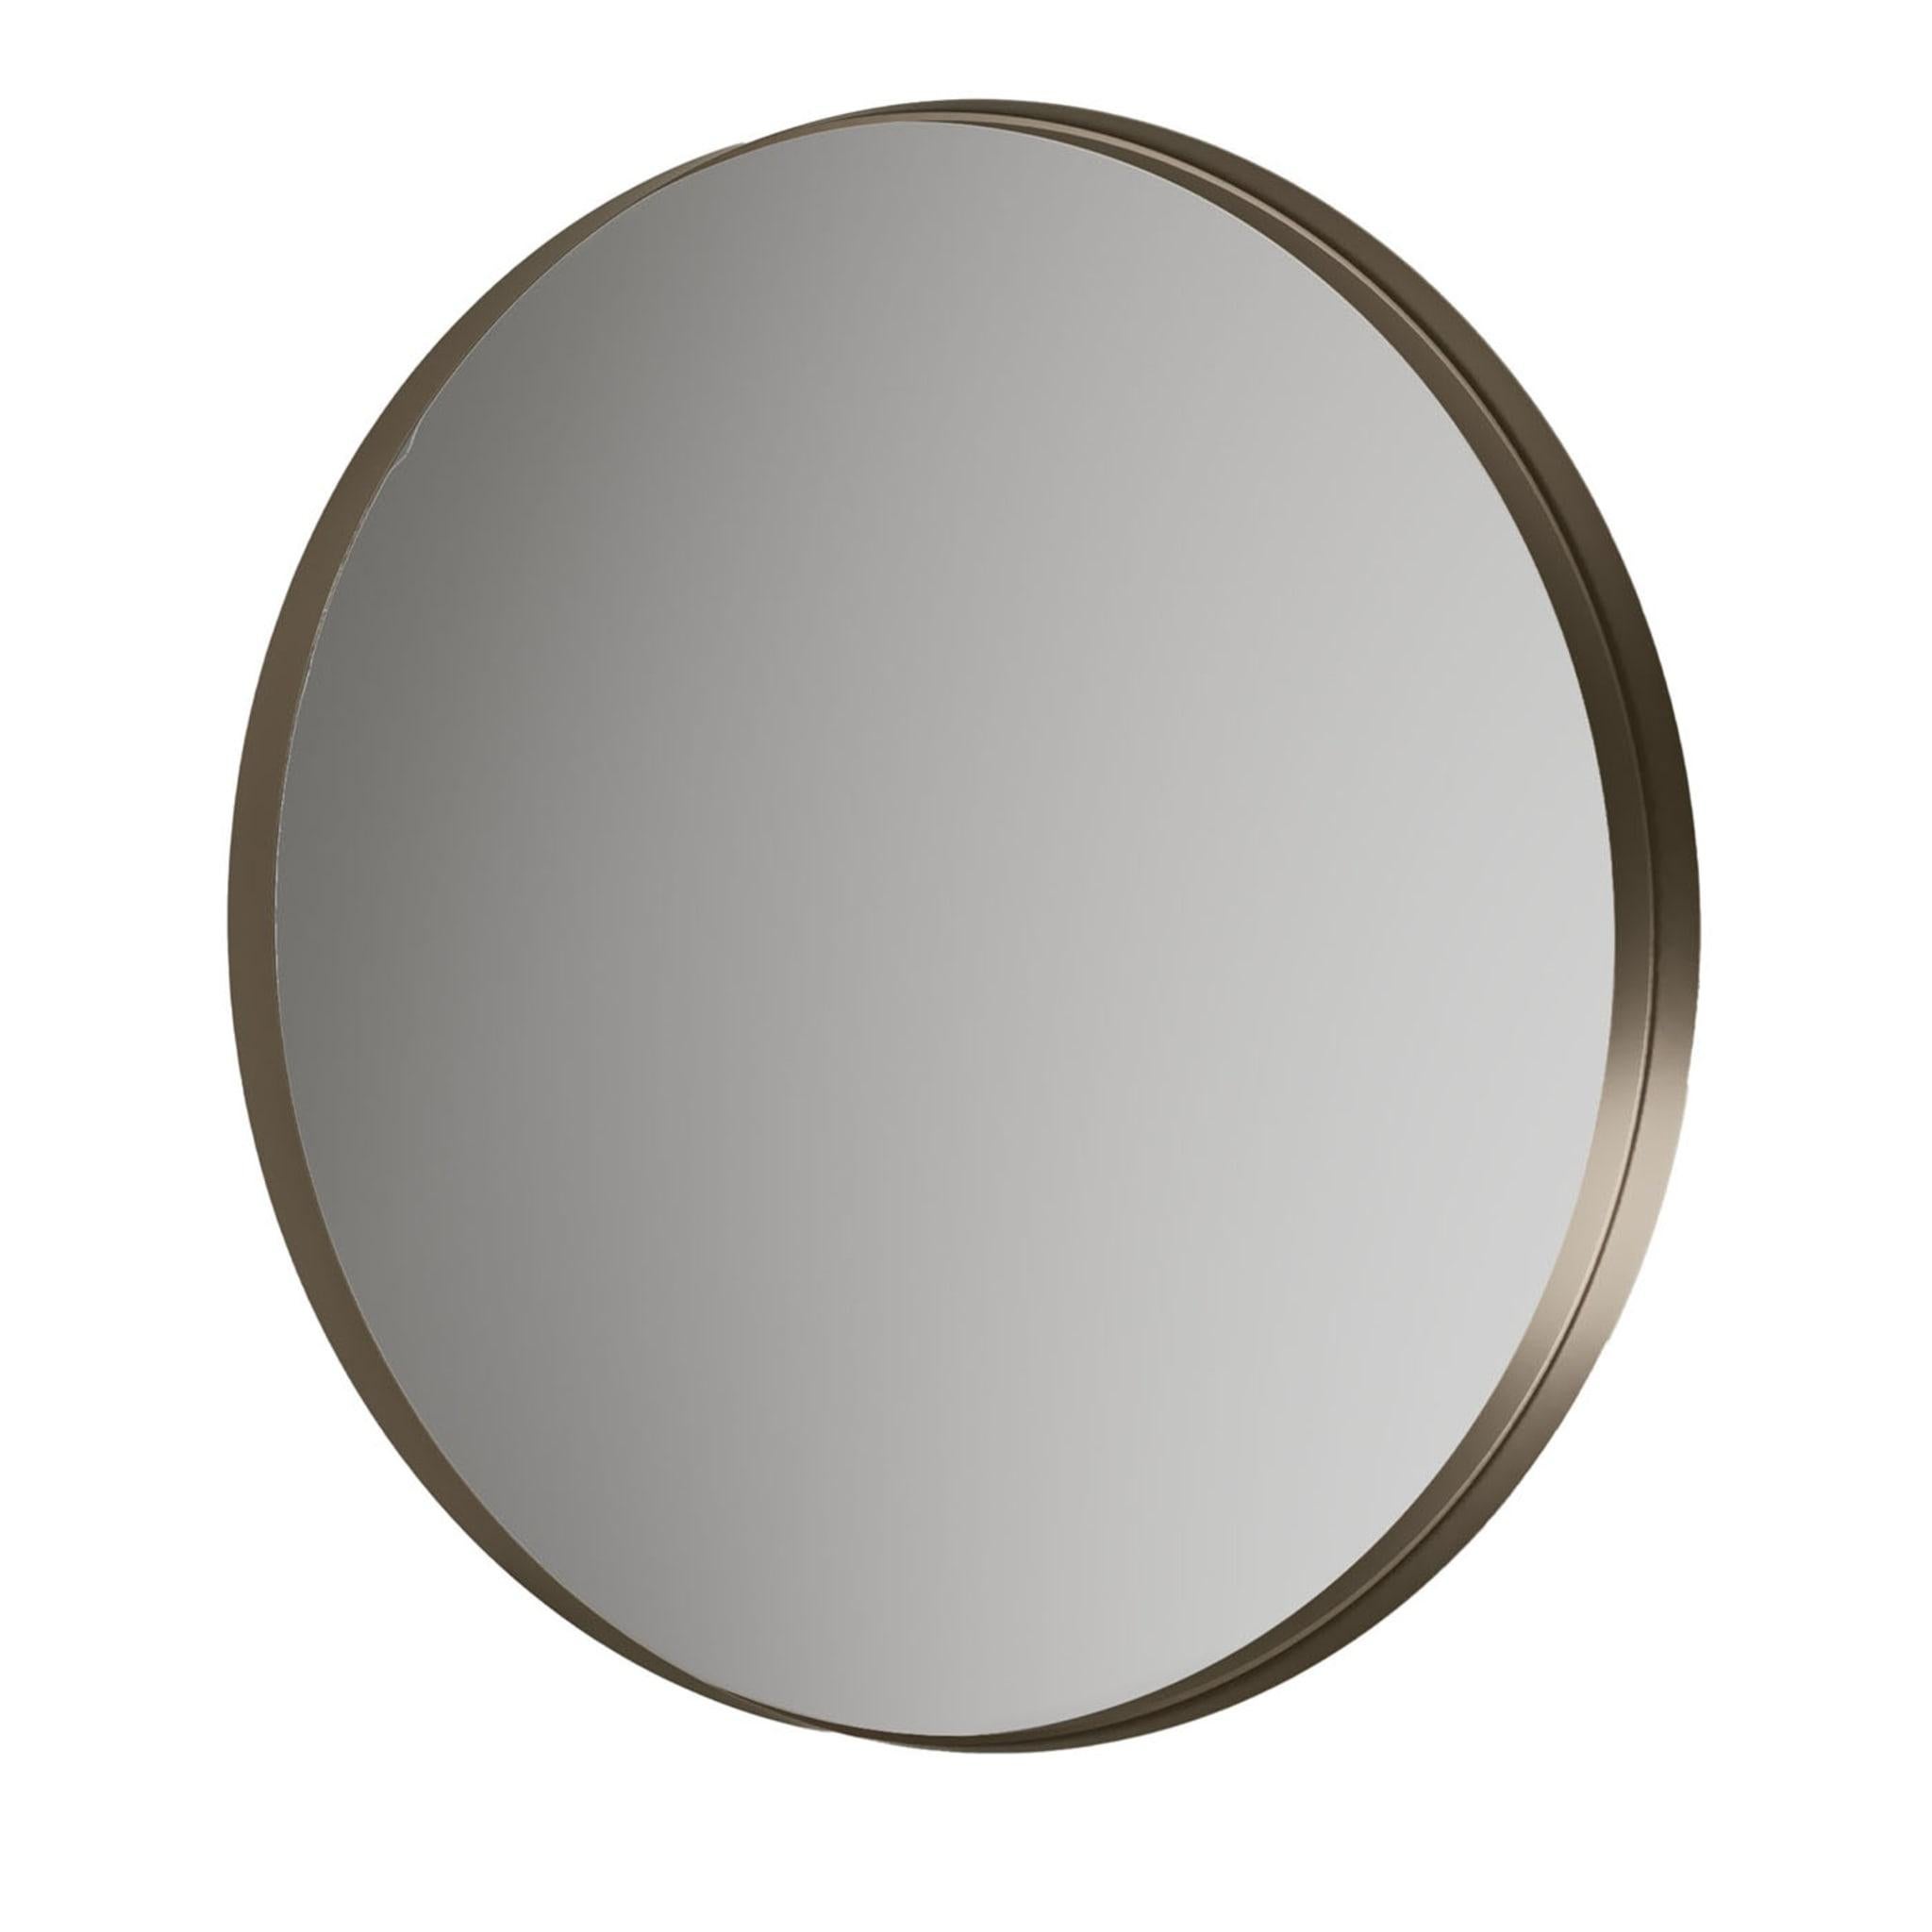 Designed by Norberto Delfinetti, this sleek wall mirror is a study in minimalism. The bare round silhouette is comprised of a titanium-varnished metal frame encasing the high-quality mirrored glass. Best showcased above a entryway console or